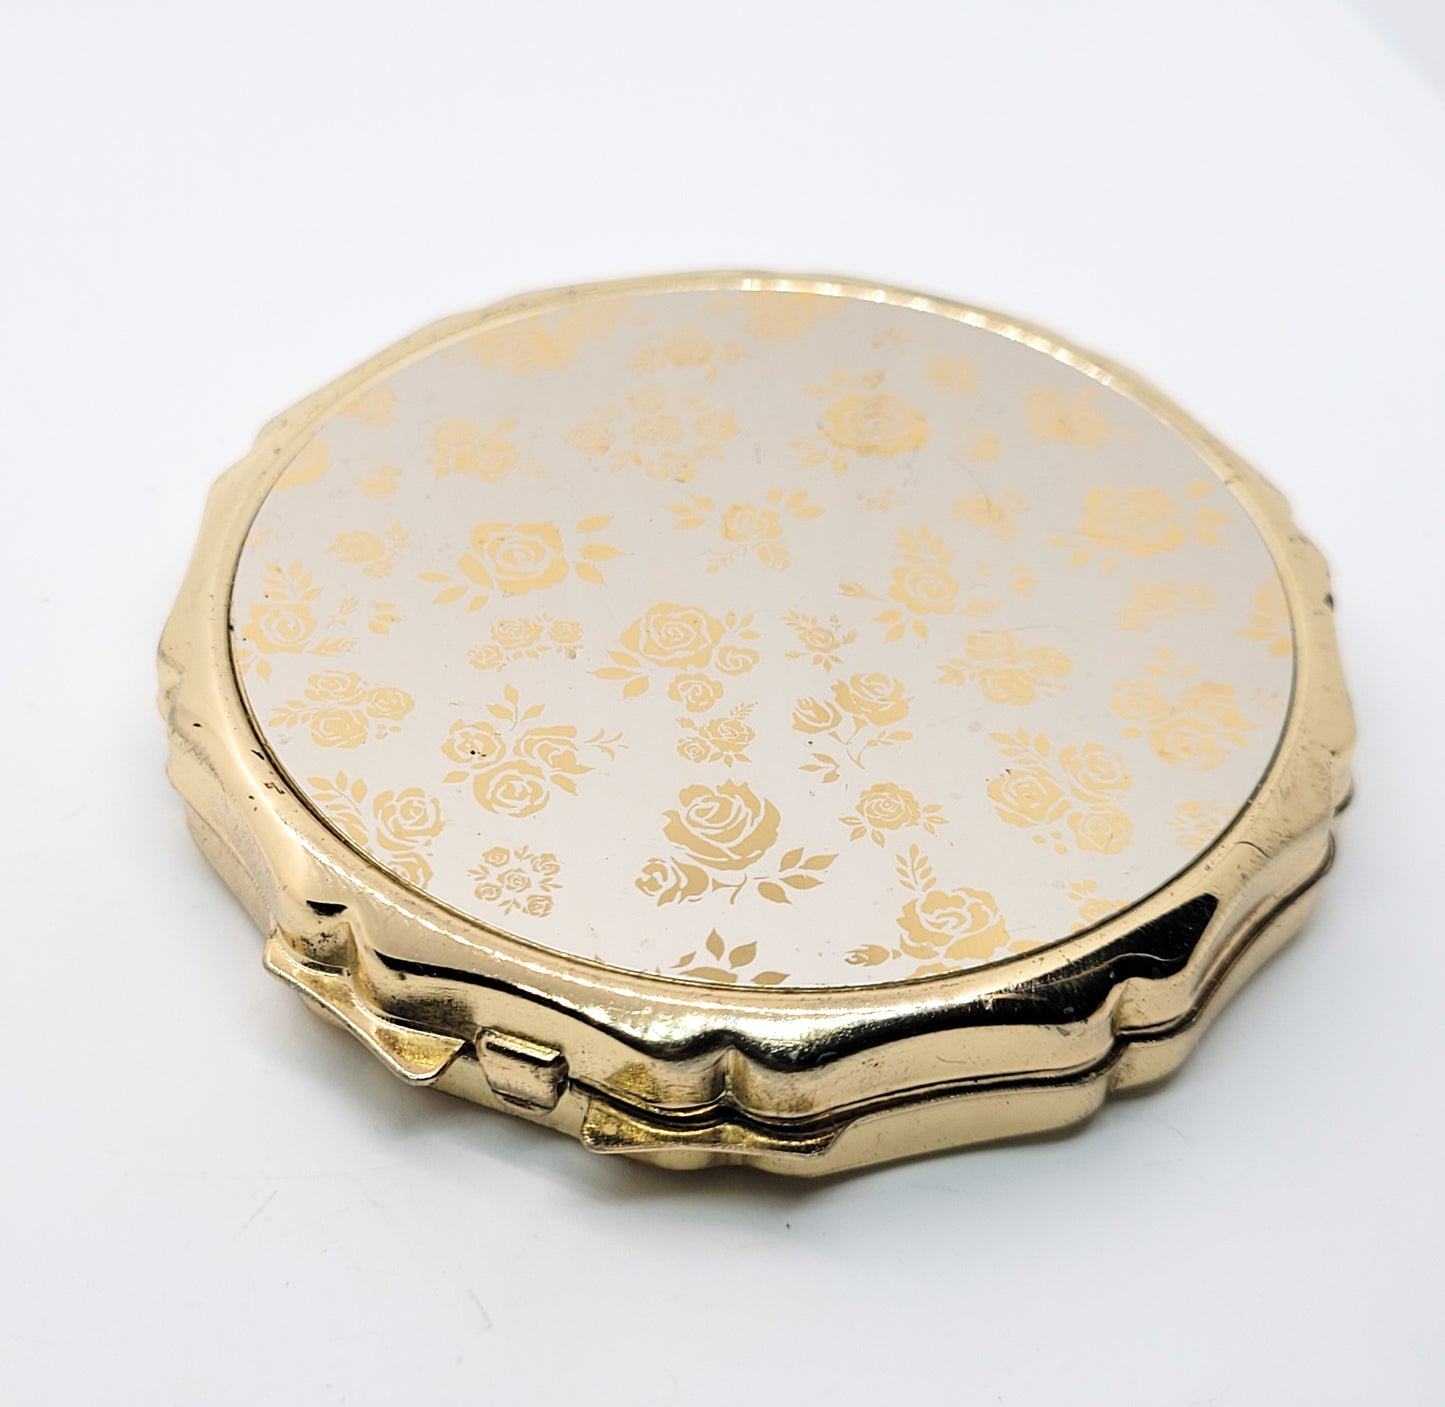 Dancing roses gold toned champagne Made in Japan vintage powder compact mirror